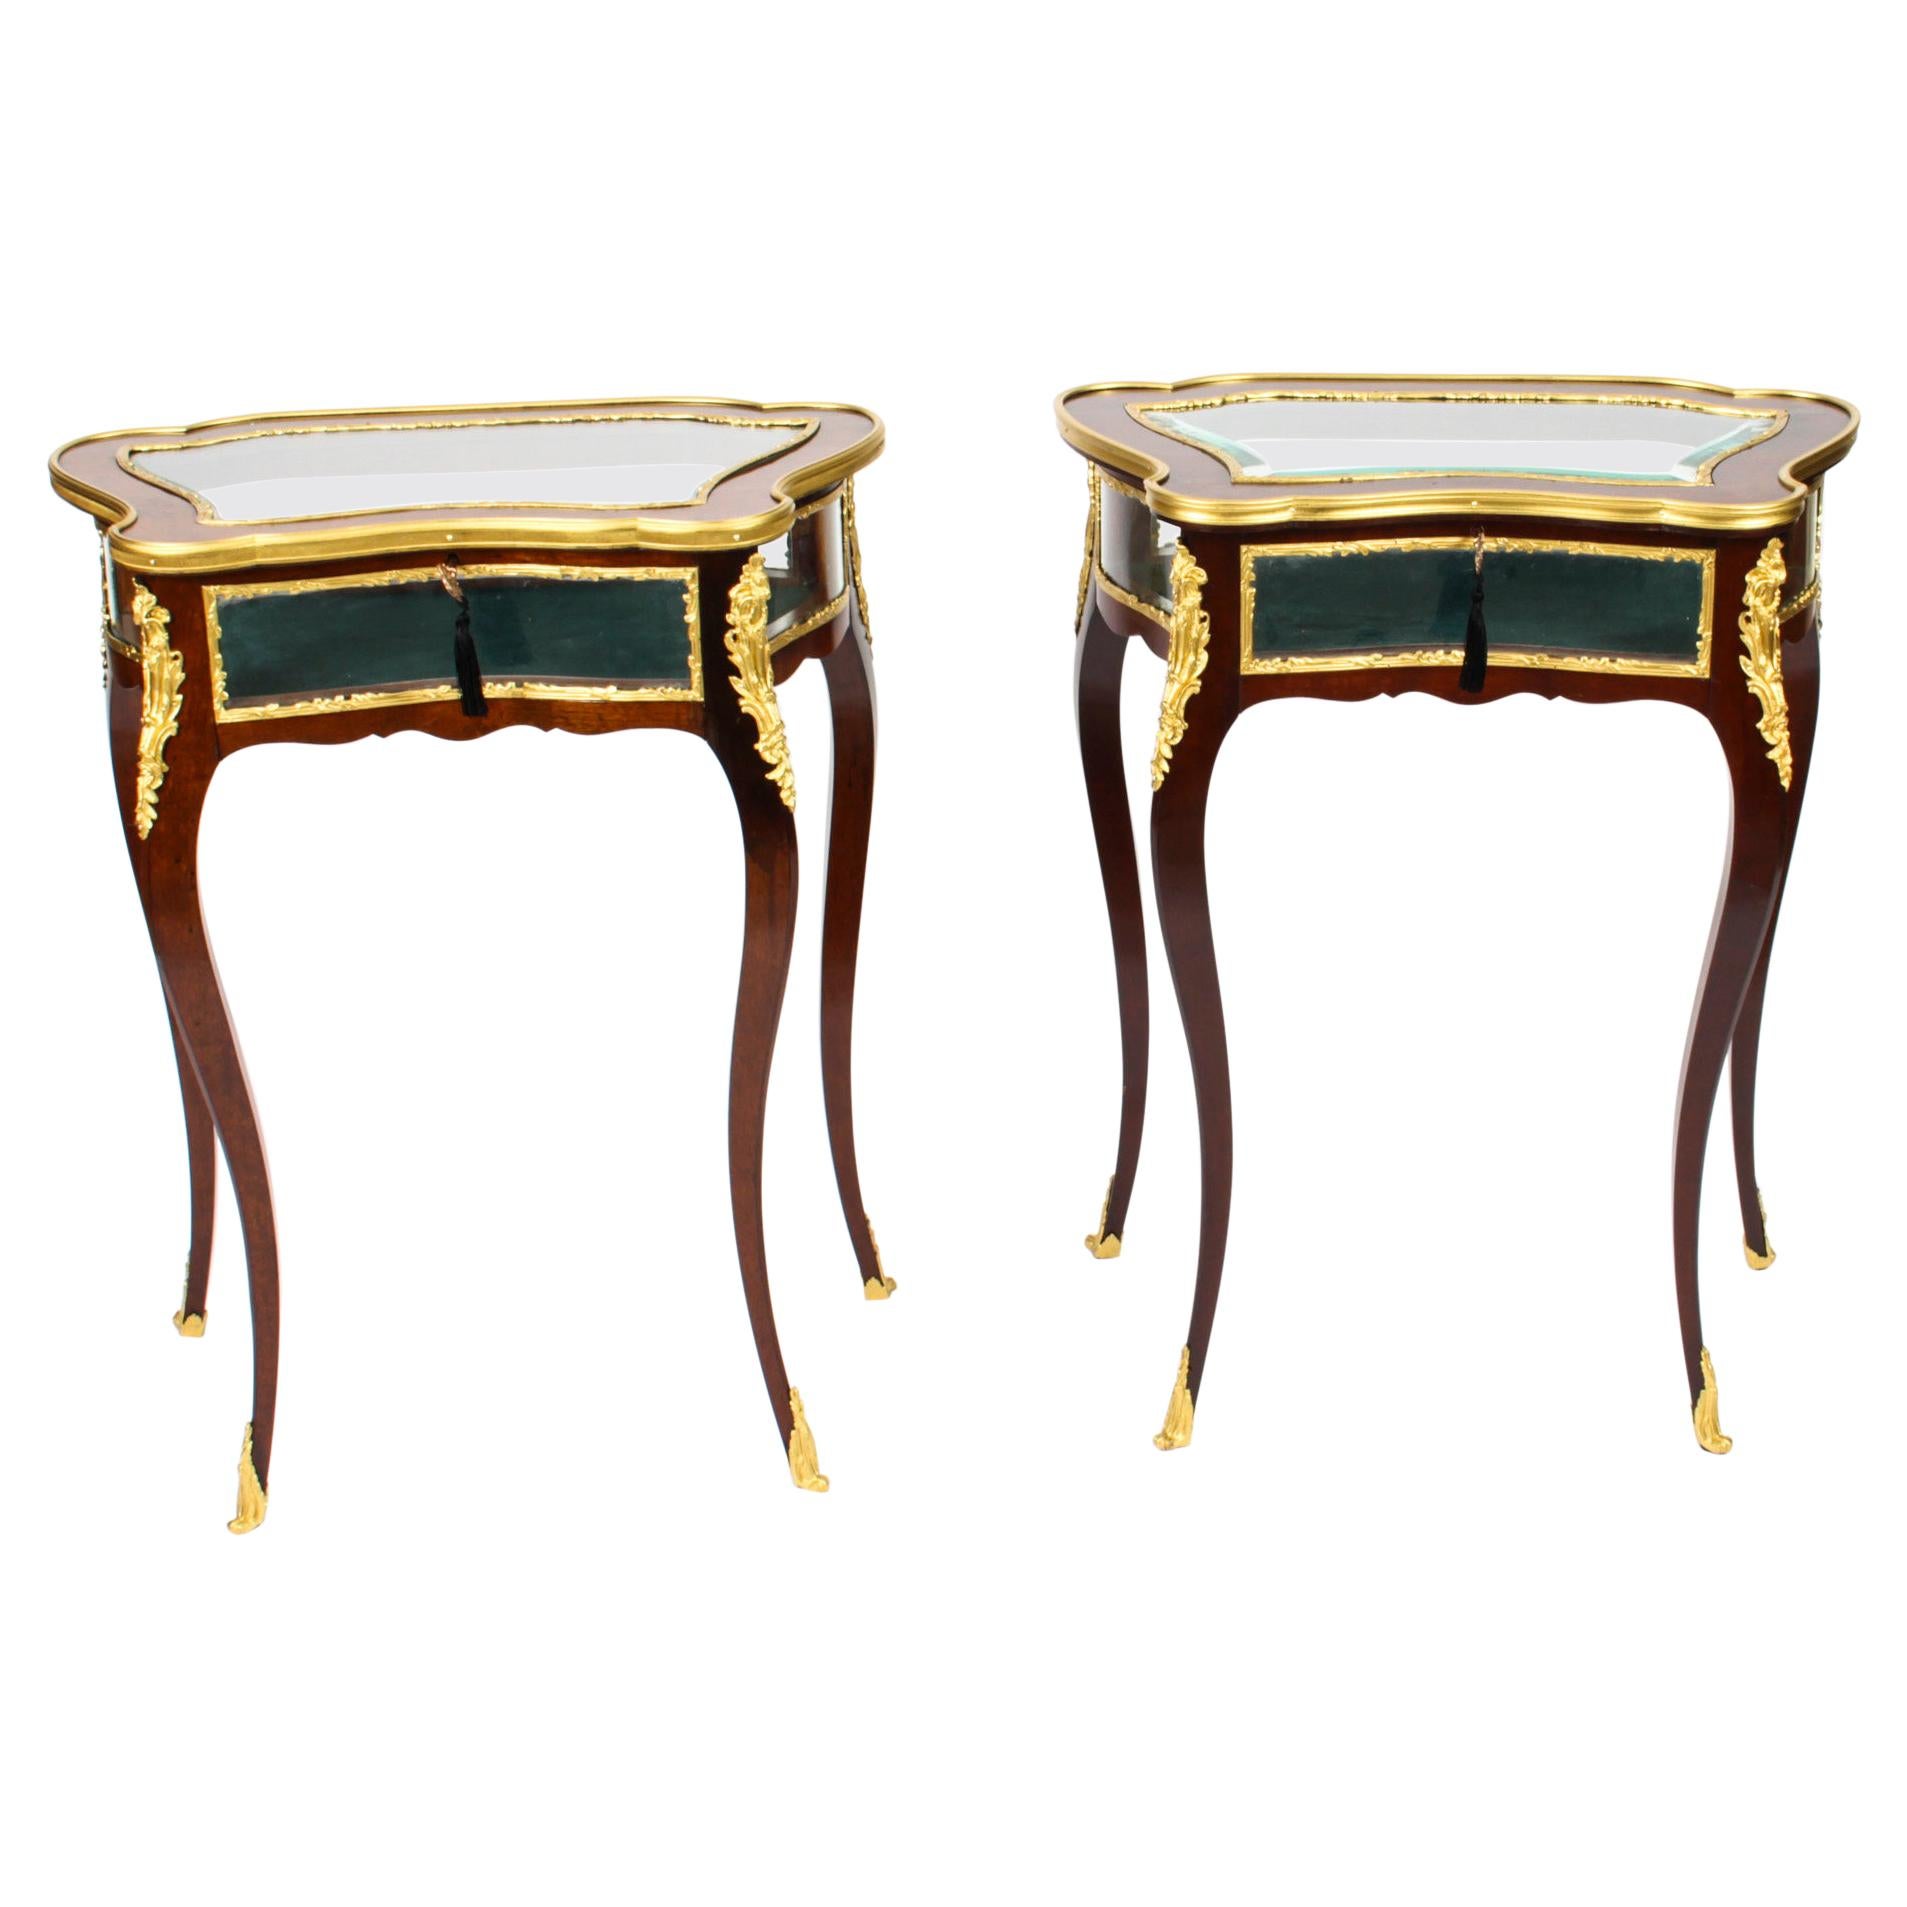 Antique Pair French Ormolu Mounted Bijouterie Display Tables, 19th Century